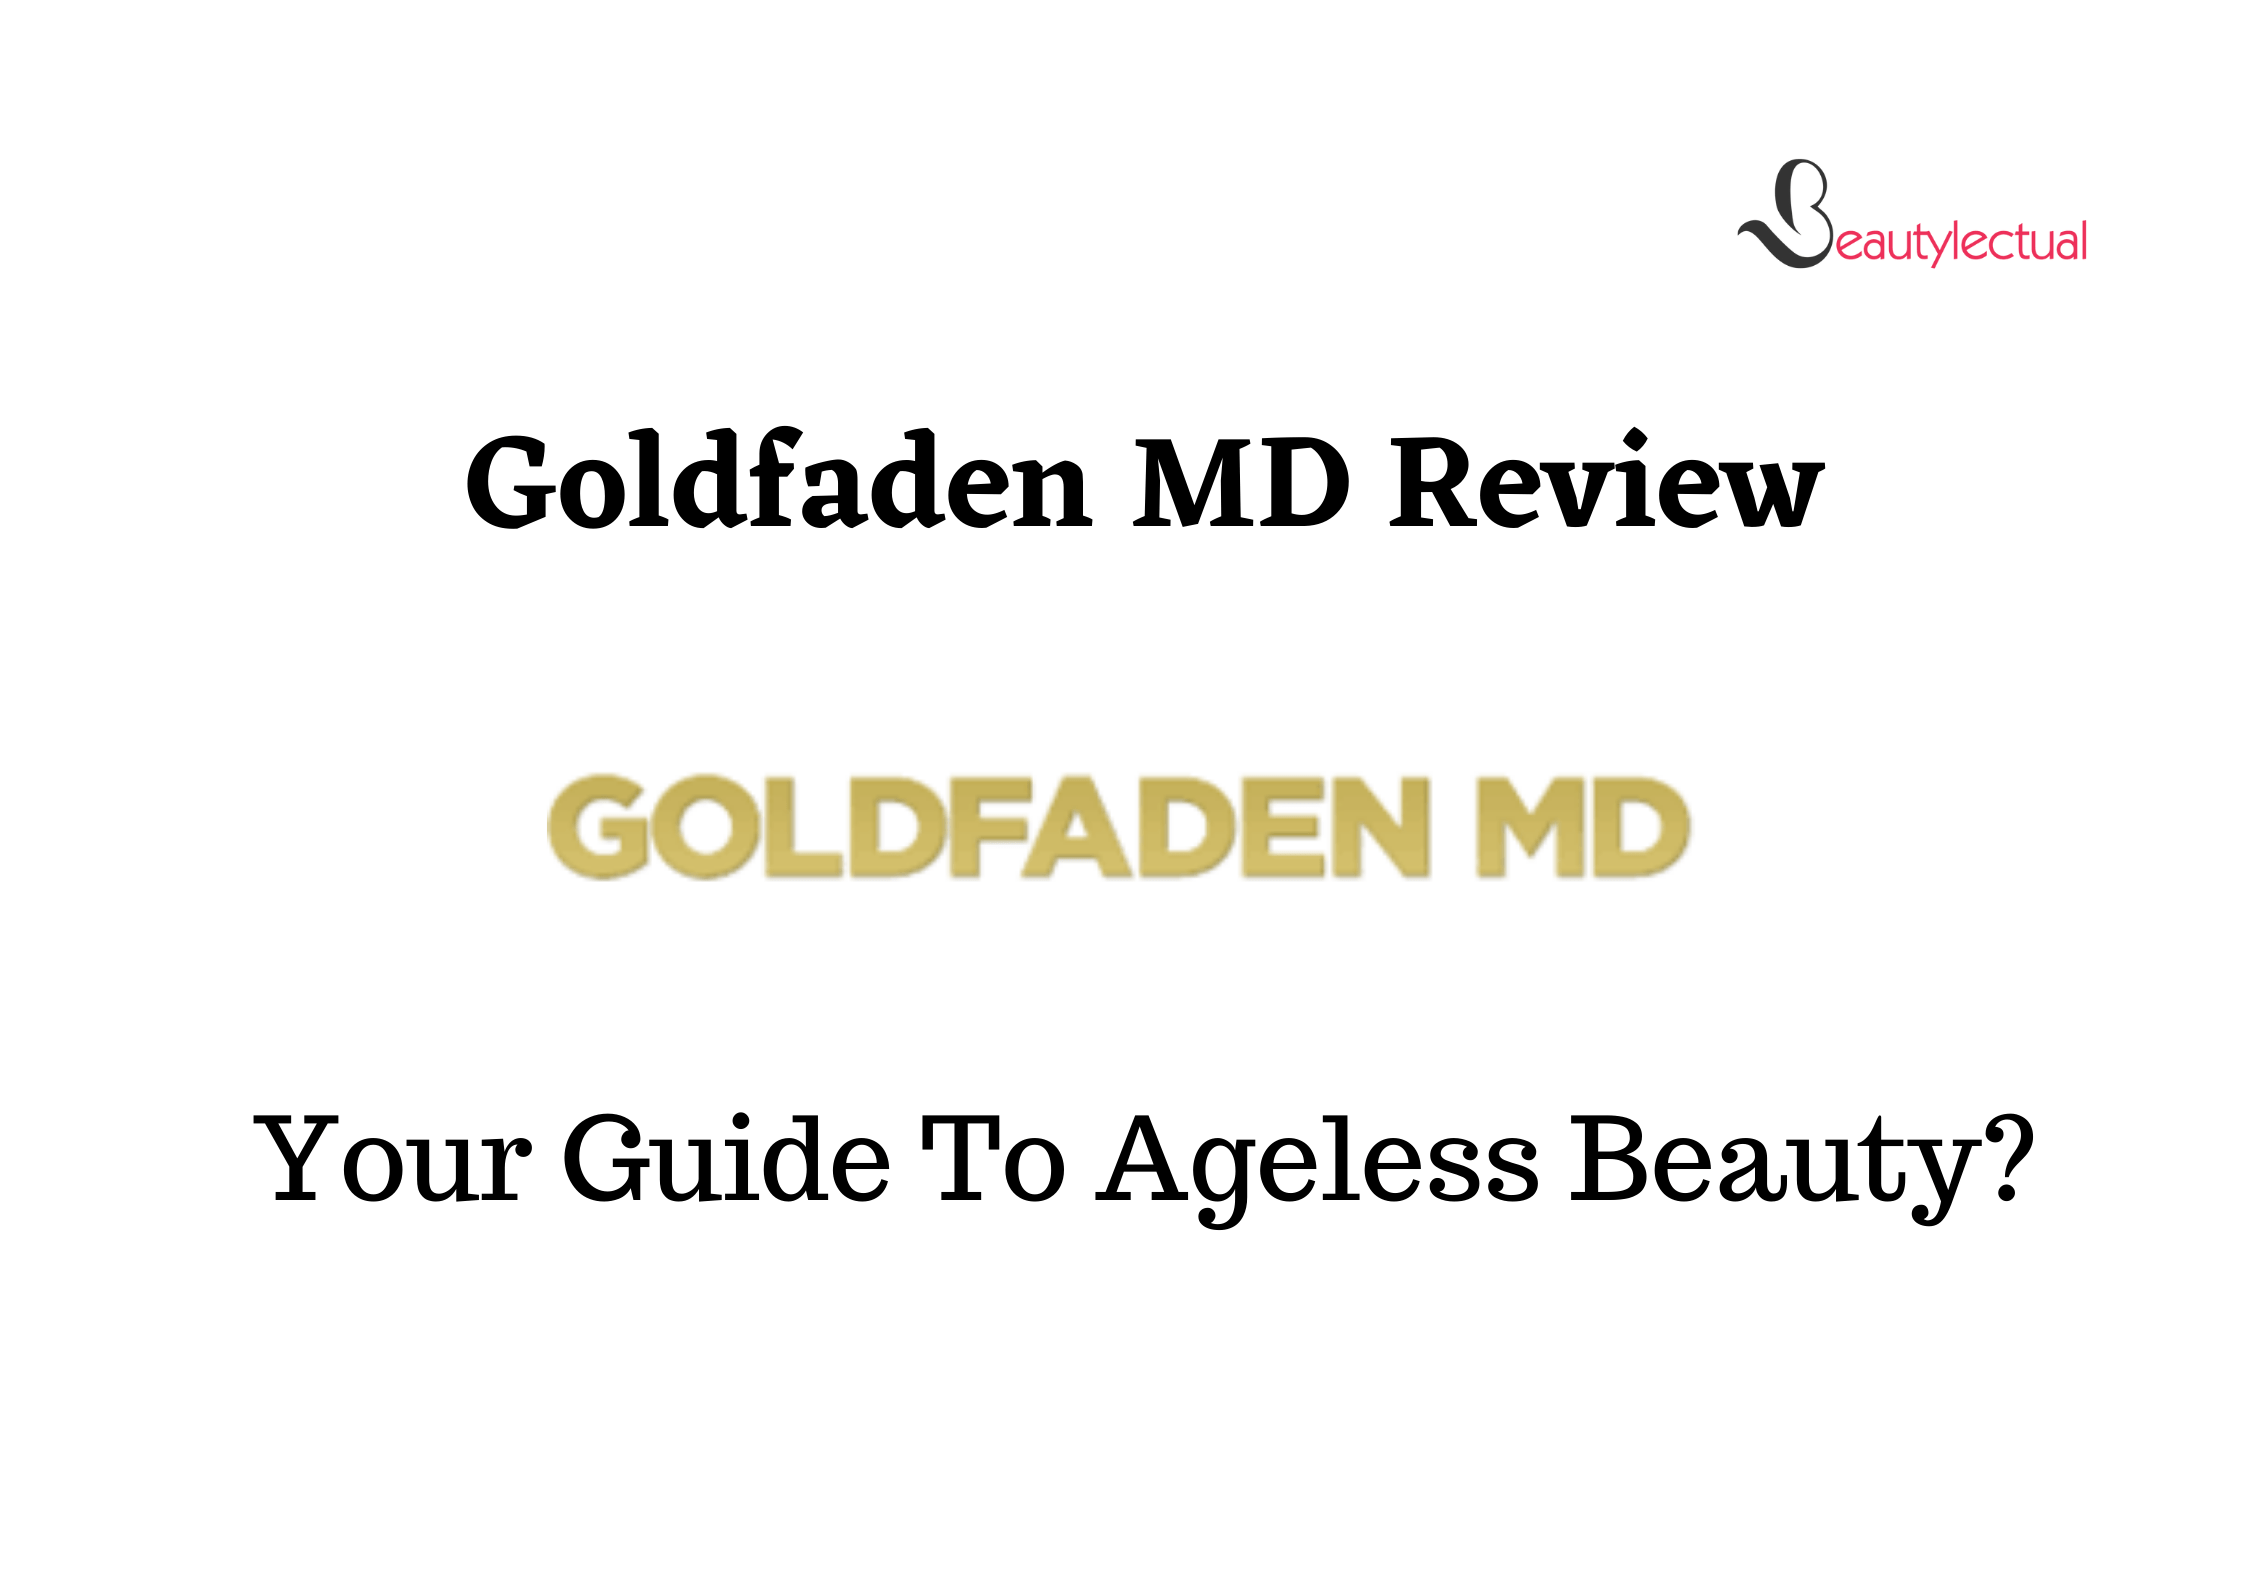 Goldfaden MD Review